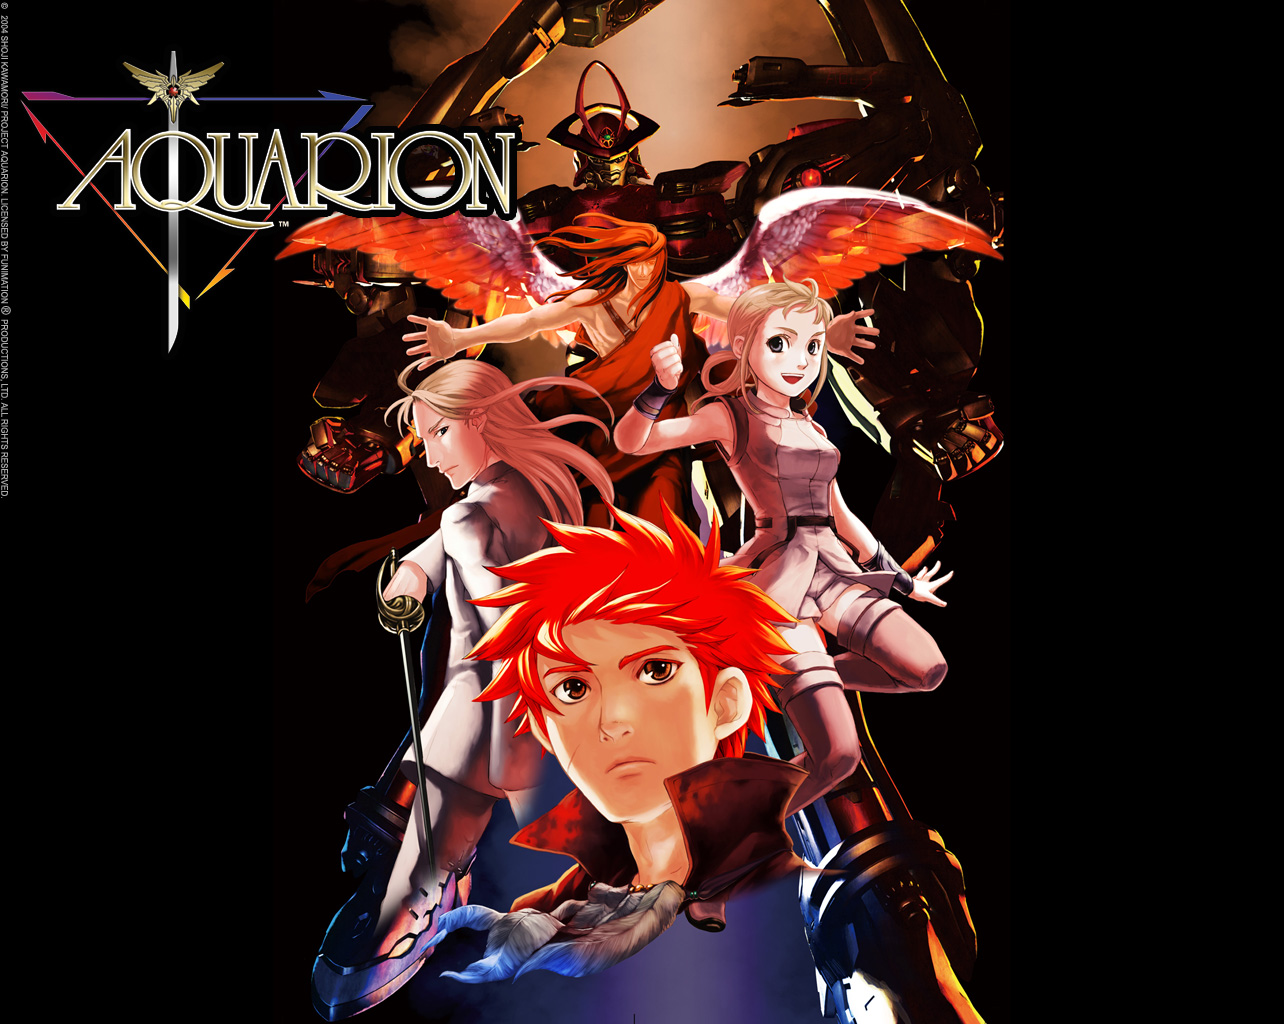 Images of Aquarion | 1284x1024